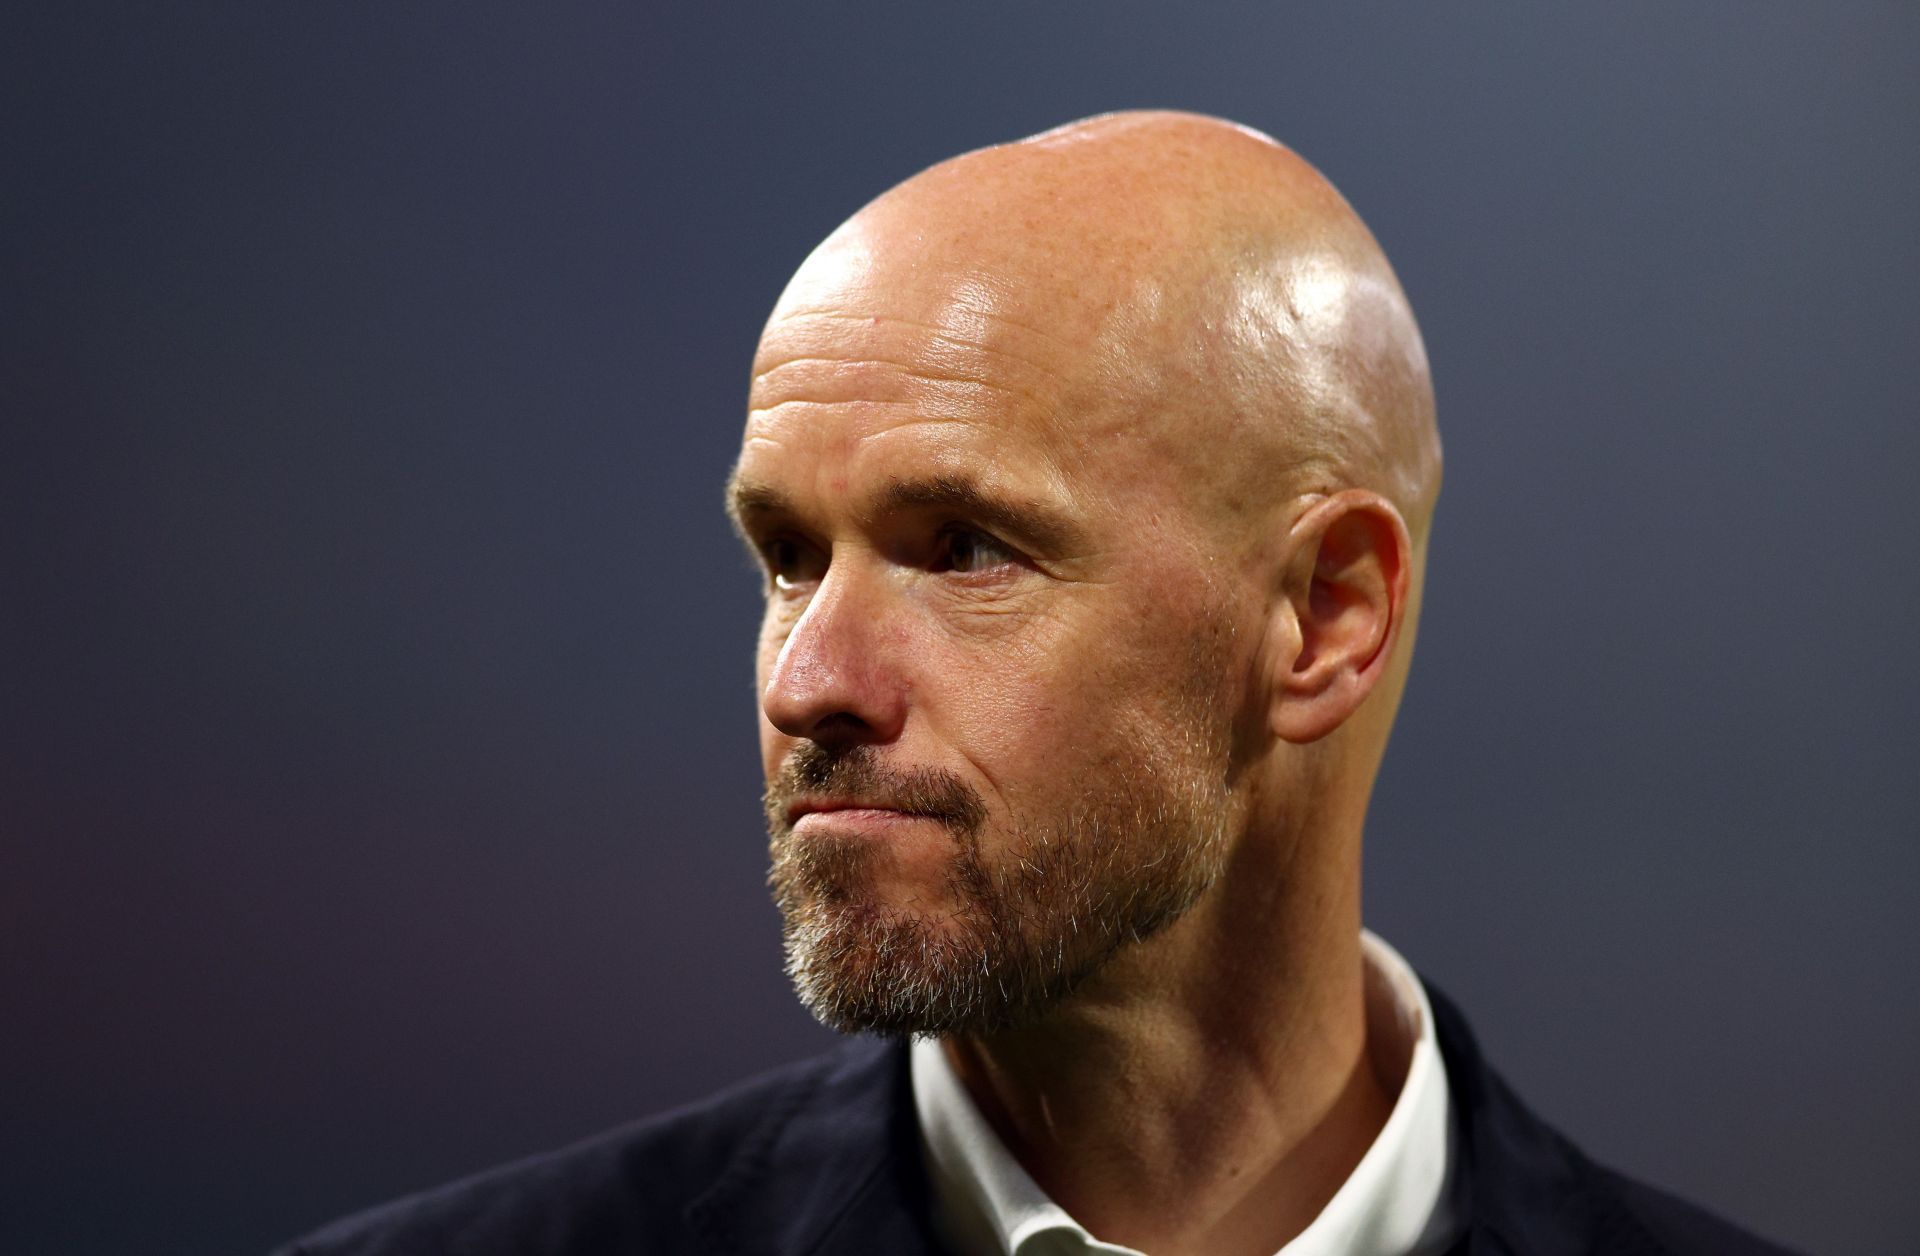 Erik ten Hag will attempt to restore the glory days at Old Trafford